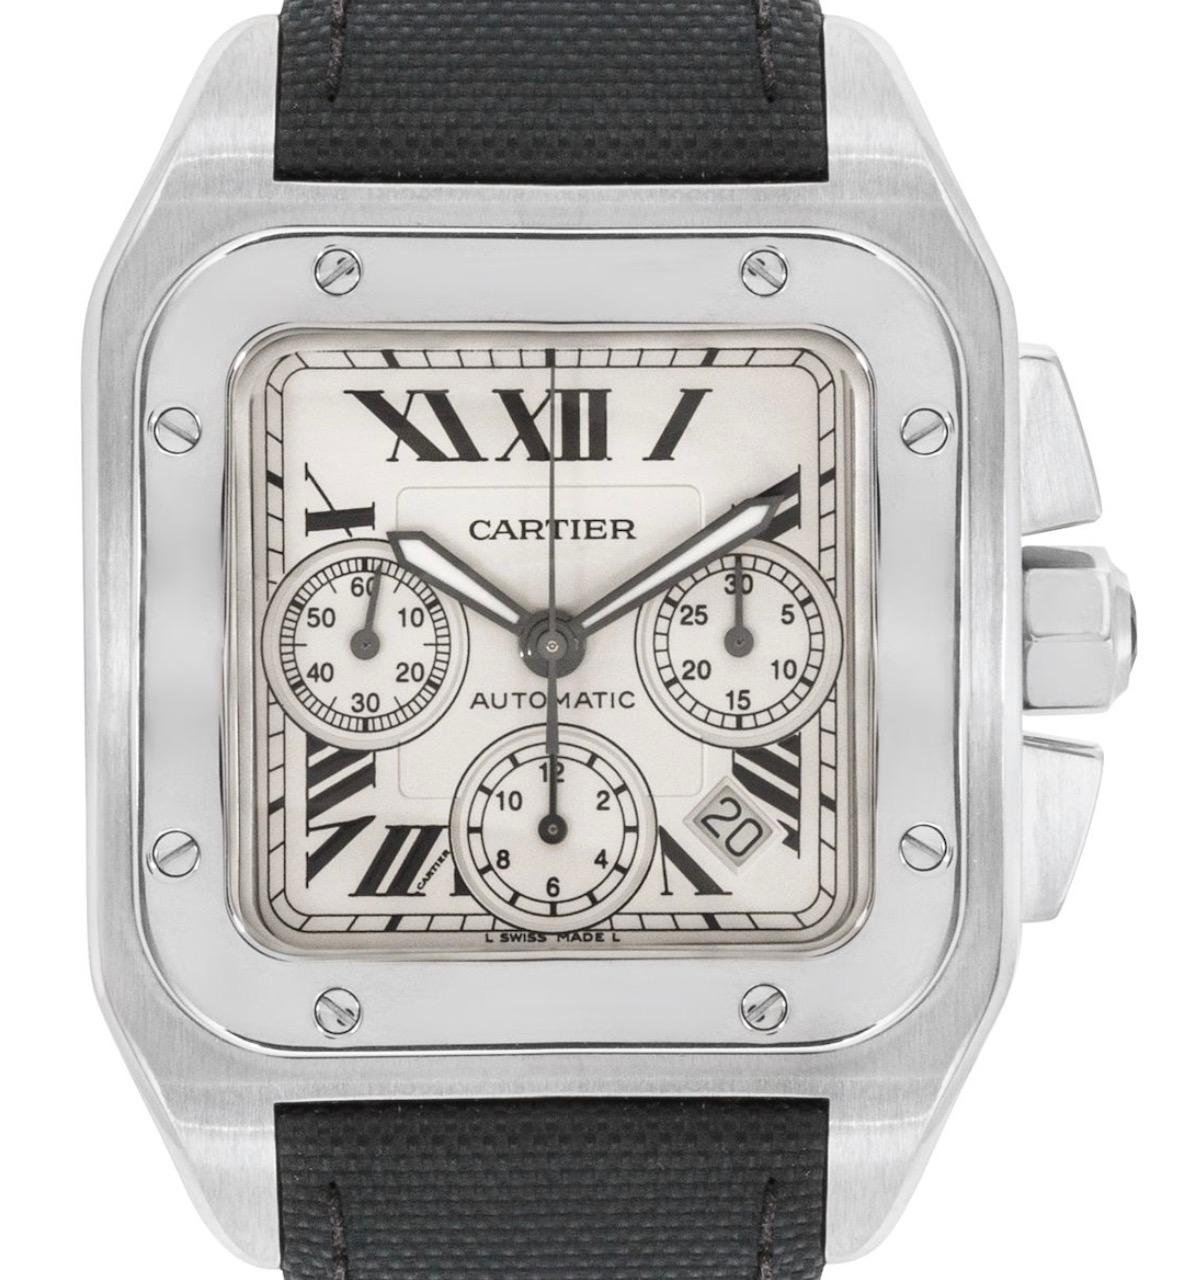 A stainless steel Santos 100 XL wristwatch. Features a silver dial with roman numerals, a date aperture, three chronograph counters and a stainless bezel set with the 8-screw design. Equipped with a Cartier black leather strap and a stainless steel